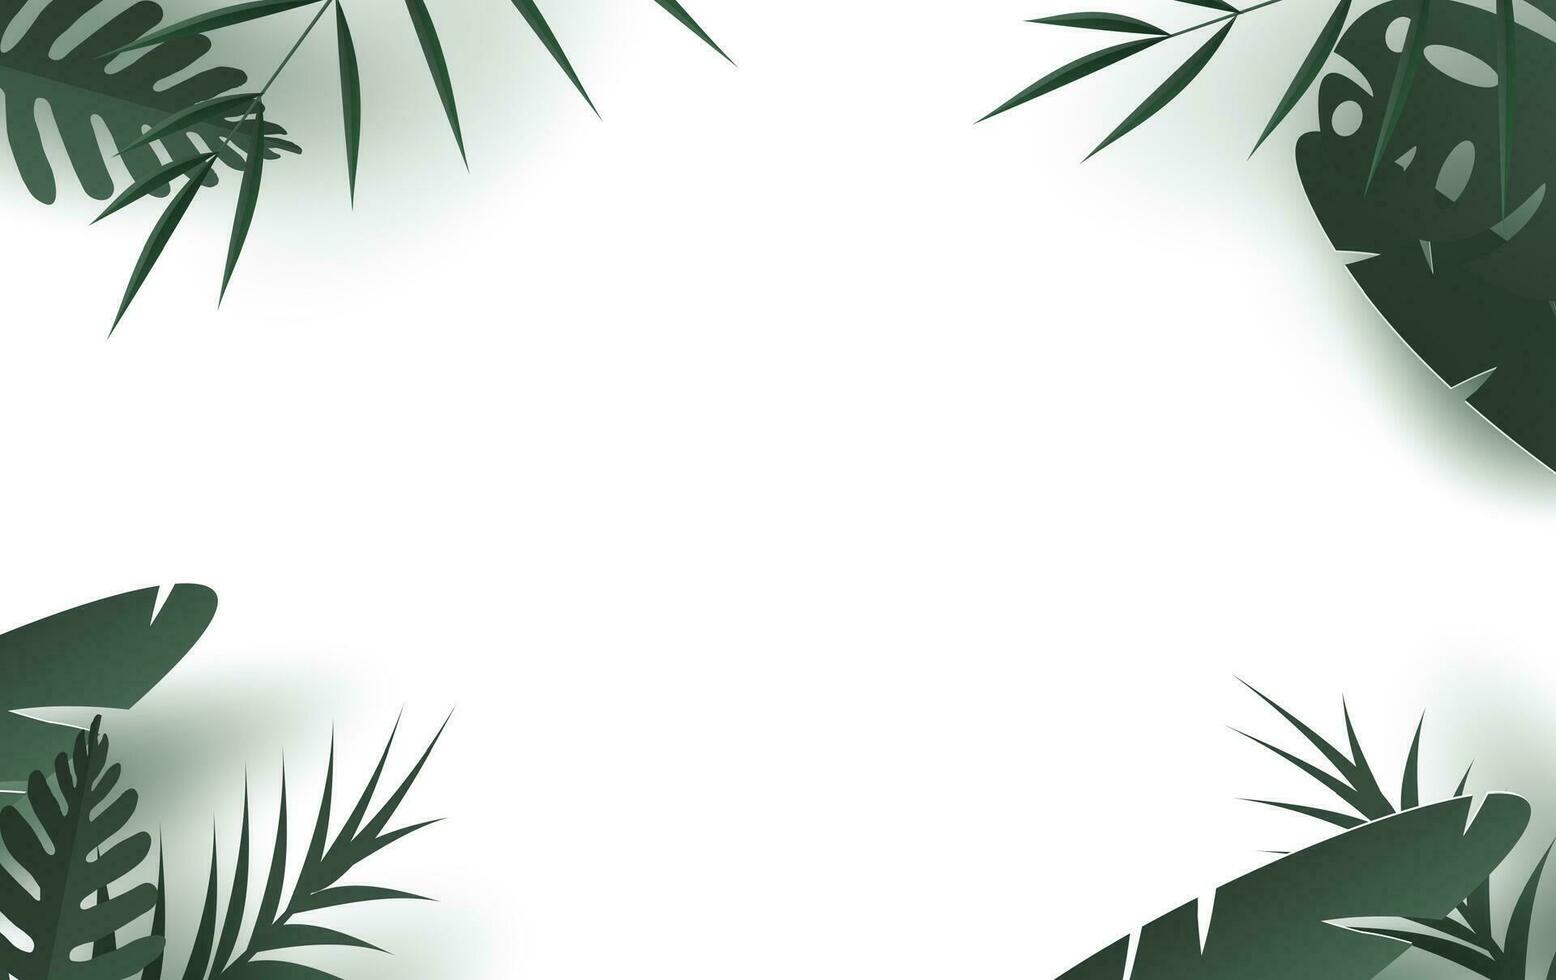 illustration of Summertime with Palm Leaf Background.jungle leaves green  seamless floral pattern.Creative Design for banner or flyer by dark green palm leaves.Paper art and craft style.vector.EPS10 vector